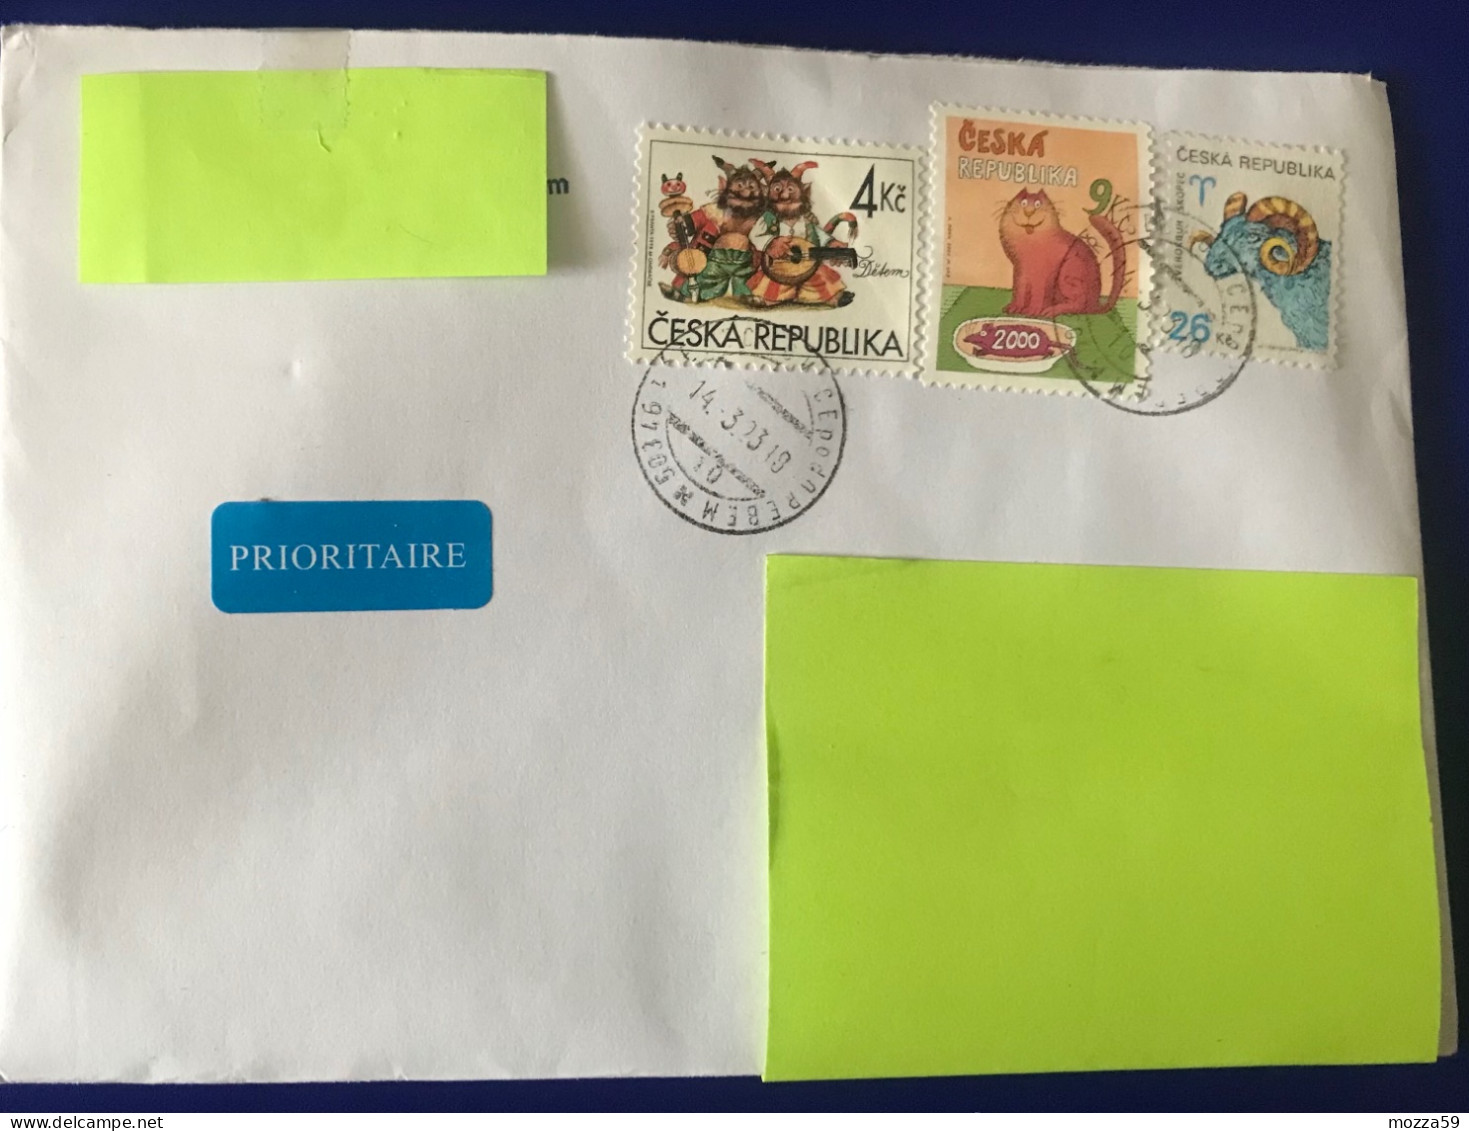 Czech Republic 2023, Třebochovice Cat Stamp With Multi Franking On Cover To U.K.  - Interesting - Covers & Documents